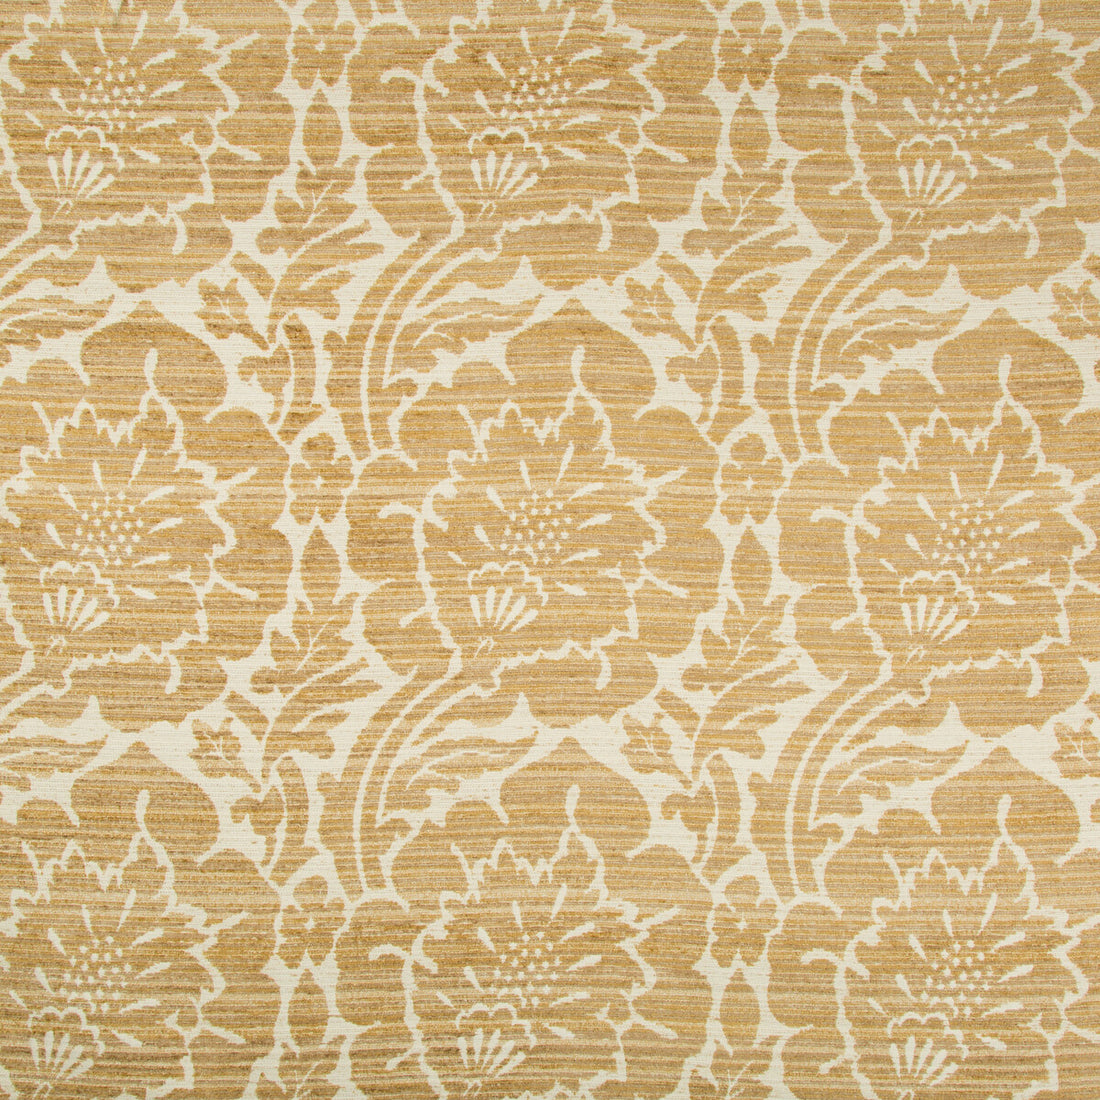 Kravet Contract fabric in 34772-4 color - pattern 34772.4.0 - by Kravet Contract in the Crypton Incase collection